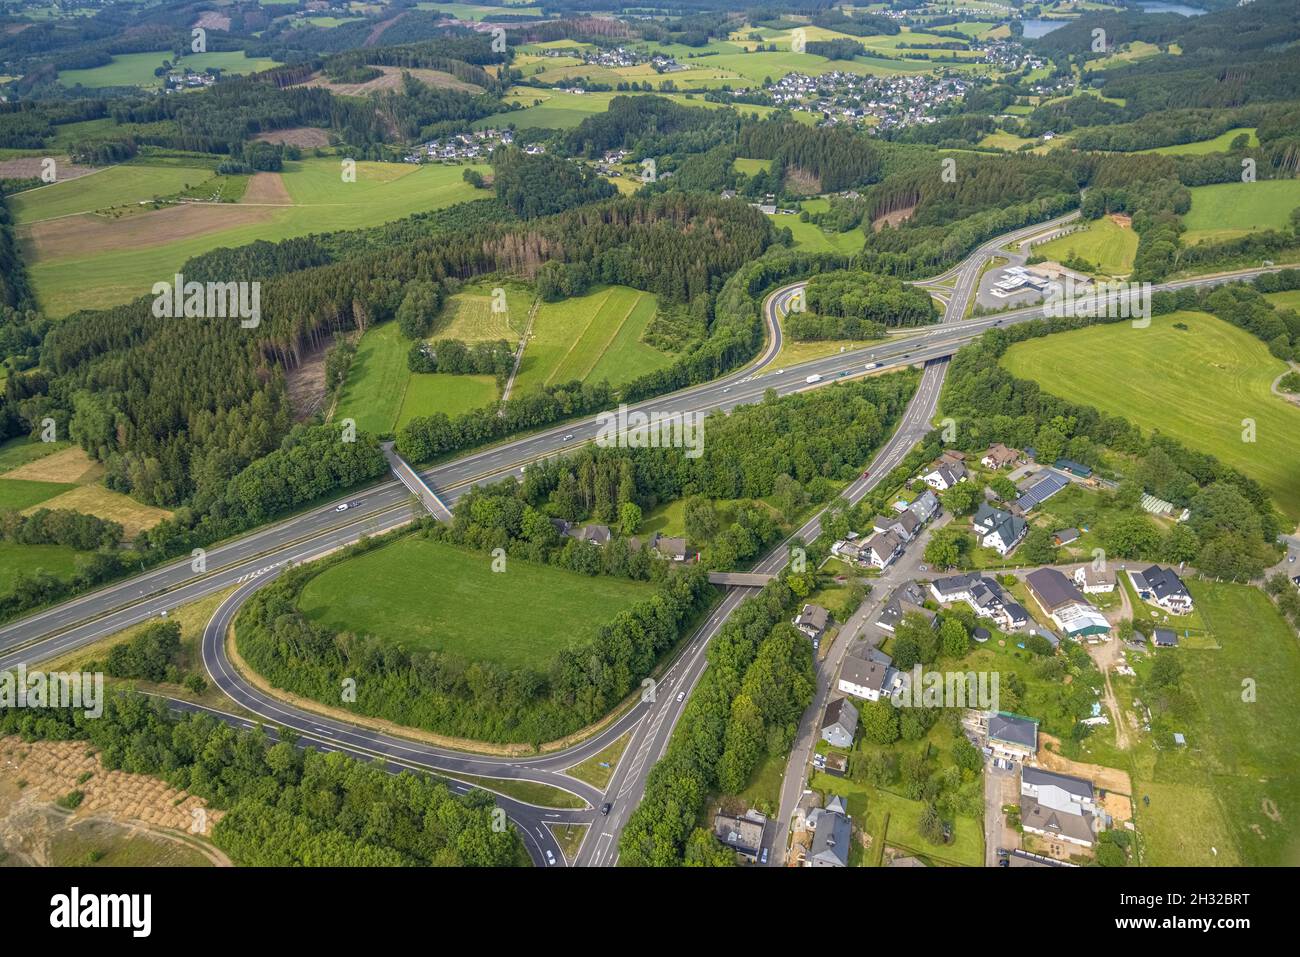 Aerial view, motorway junction Drolshagen, motorway A45 with petrol station and tree roundabout, Germinghausen, Drolshagen, Sauerland, North Rhine-Wes Stock Photo